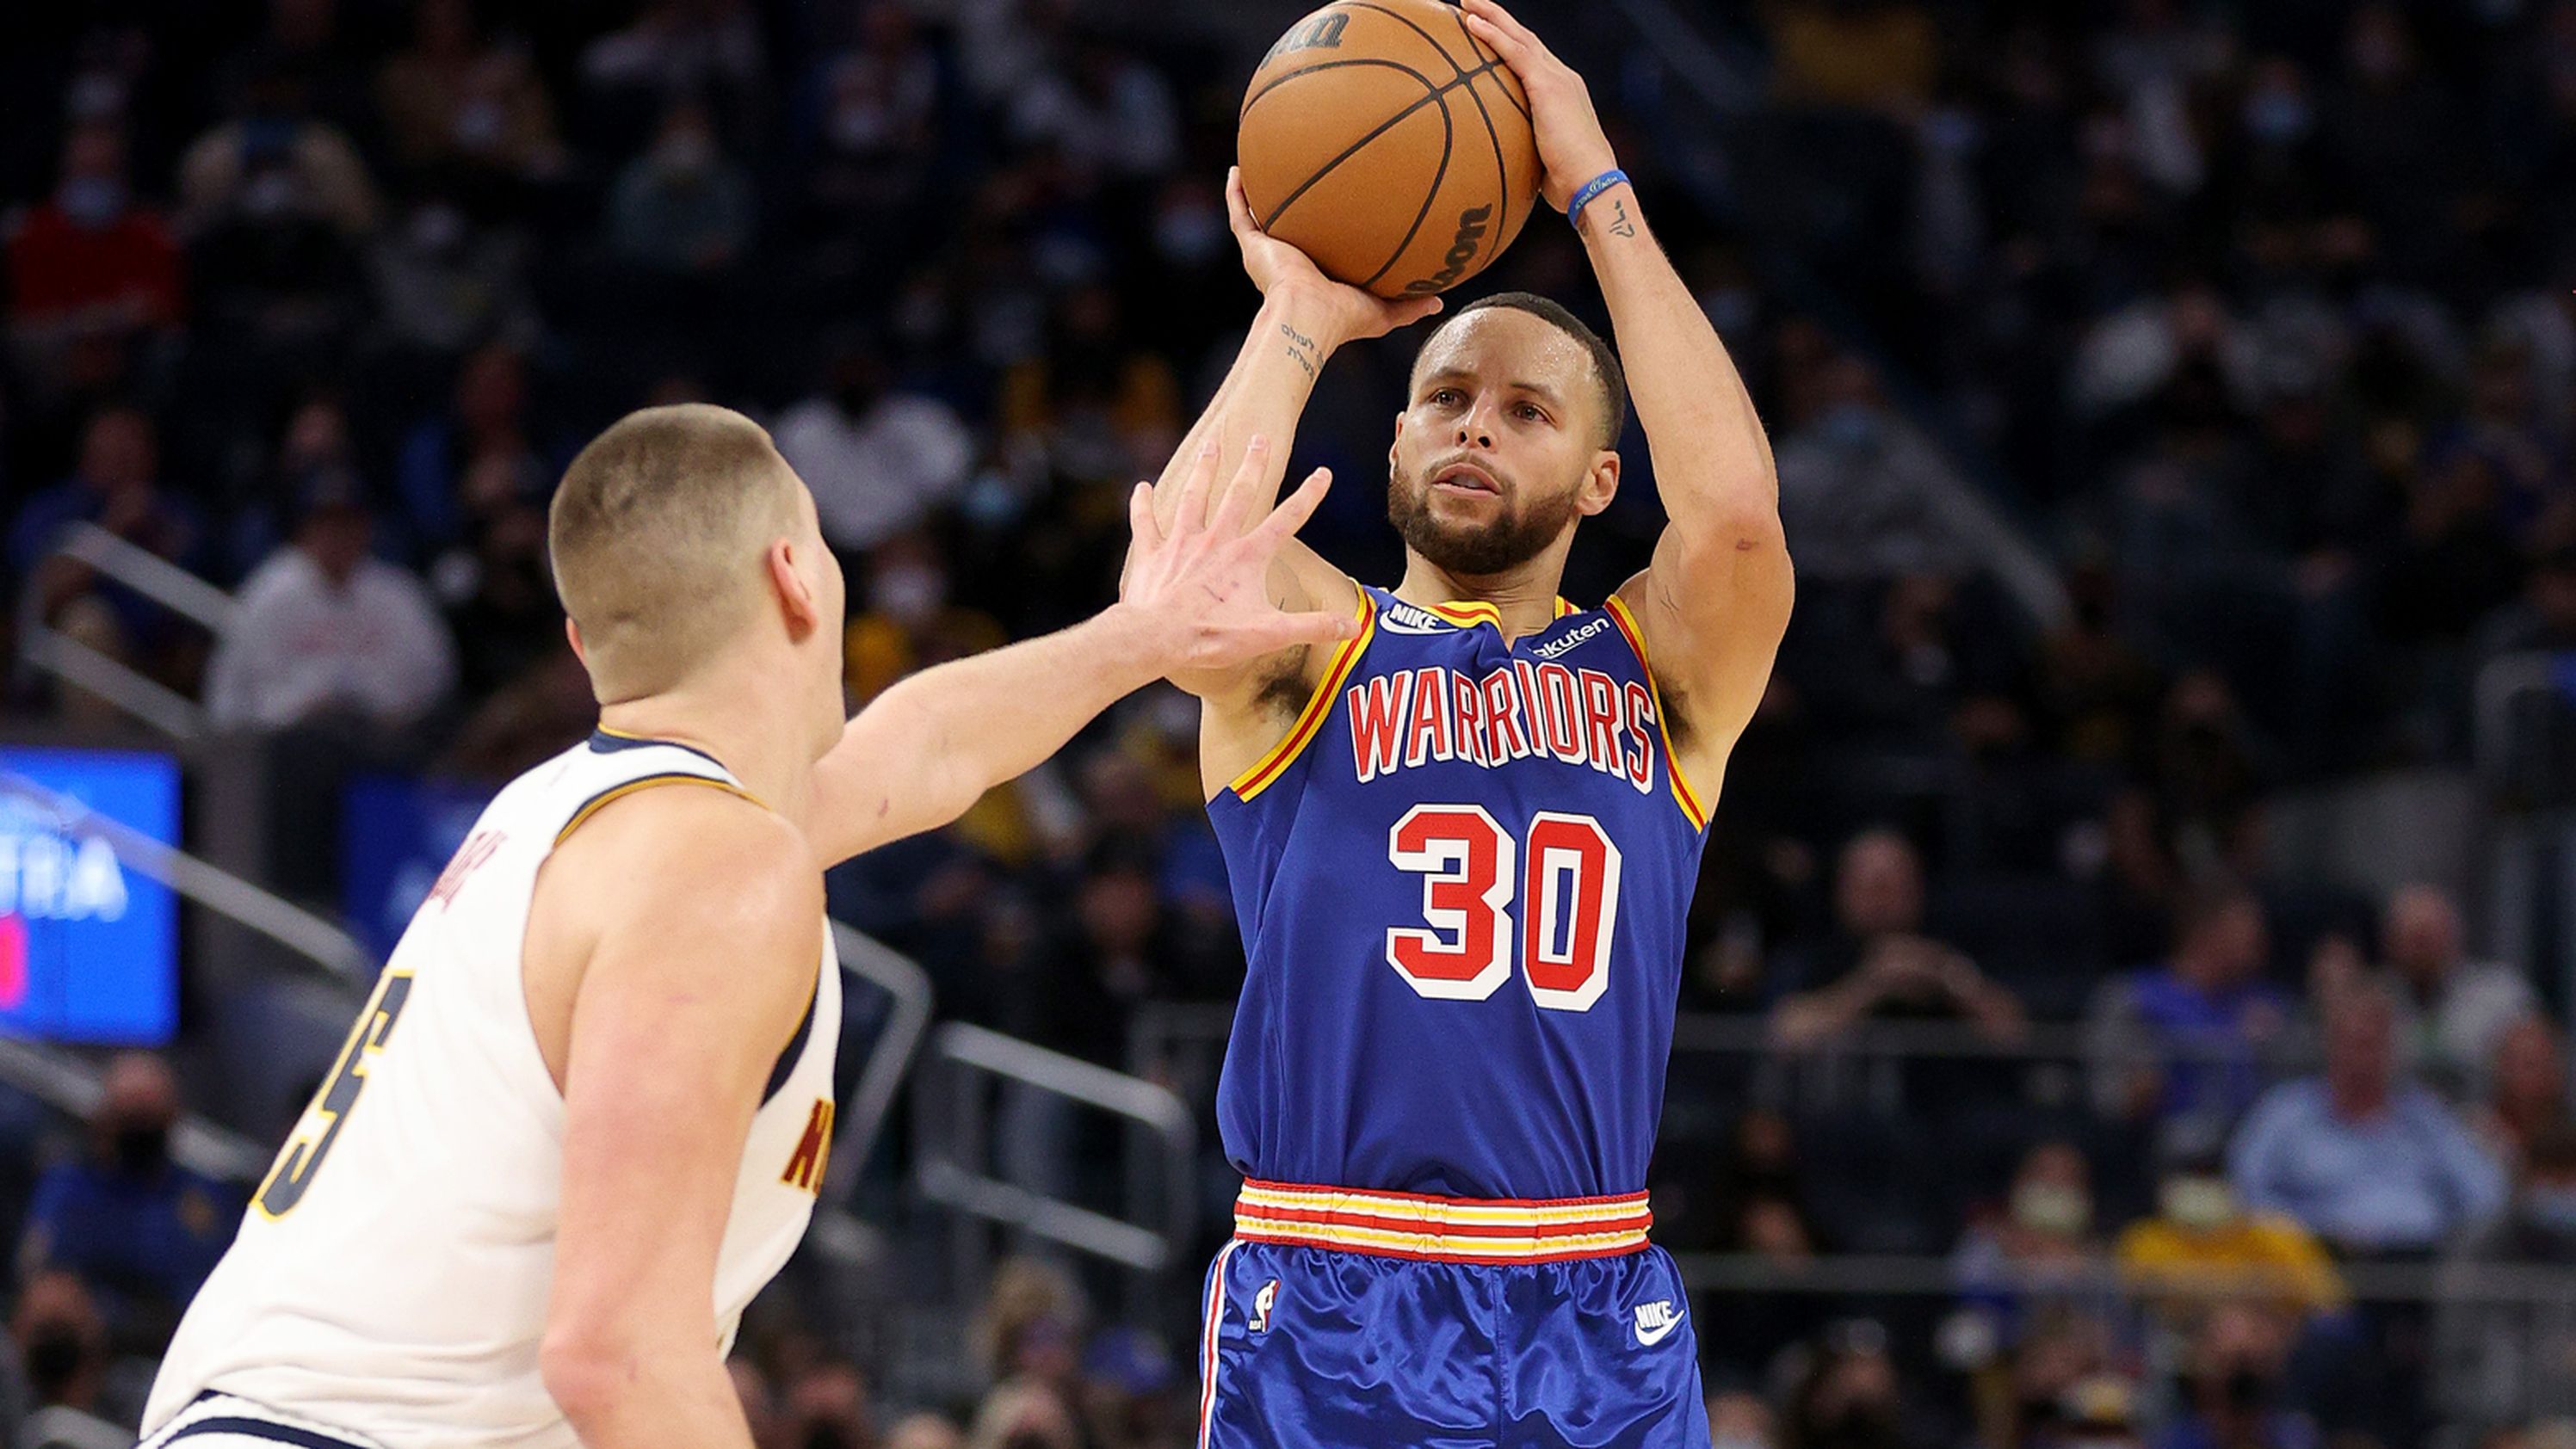 Steph Curry becomes first player to hit 3000 three-pointers in the NBA